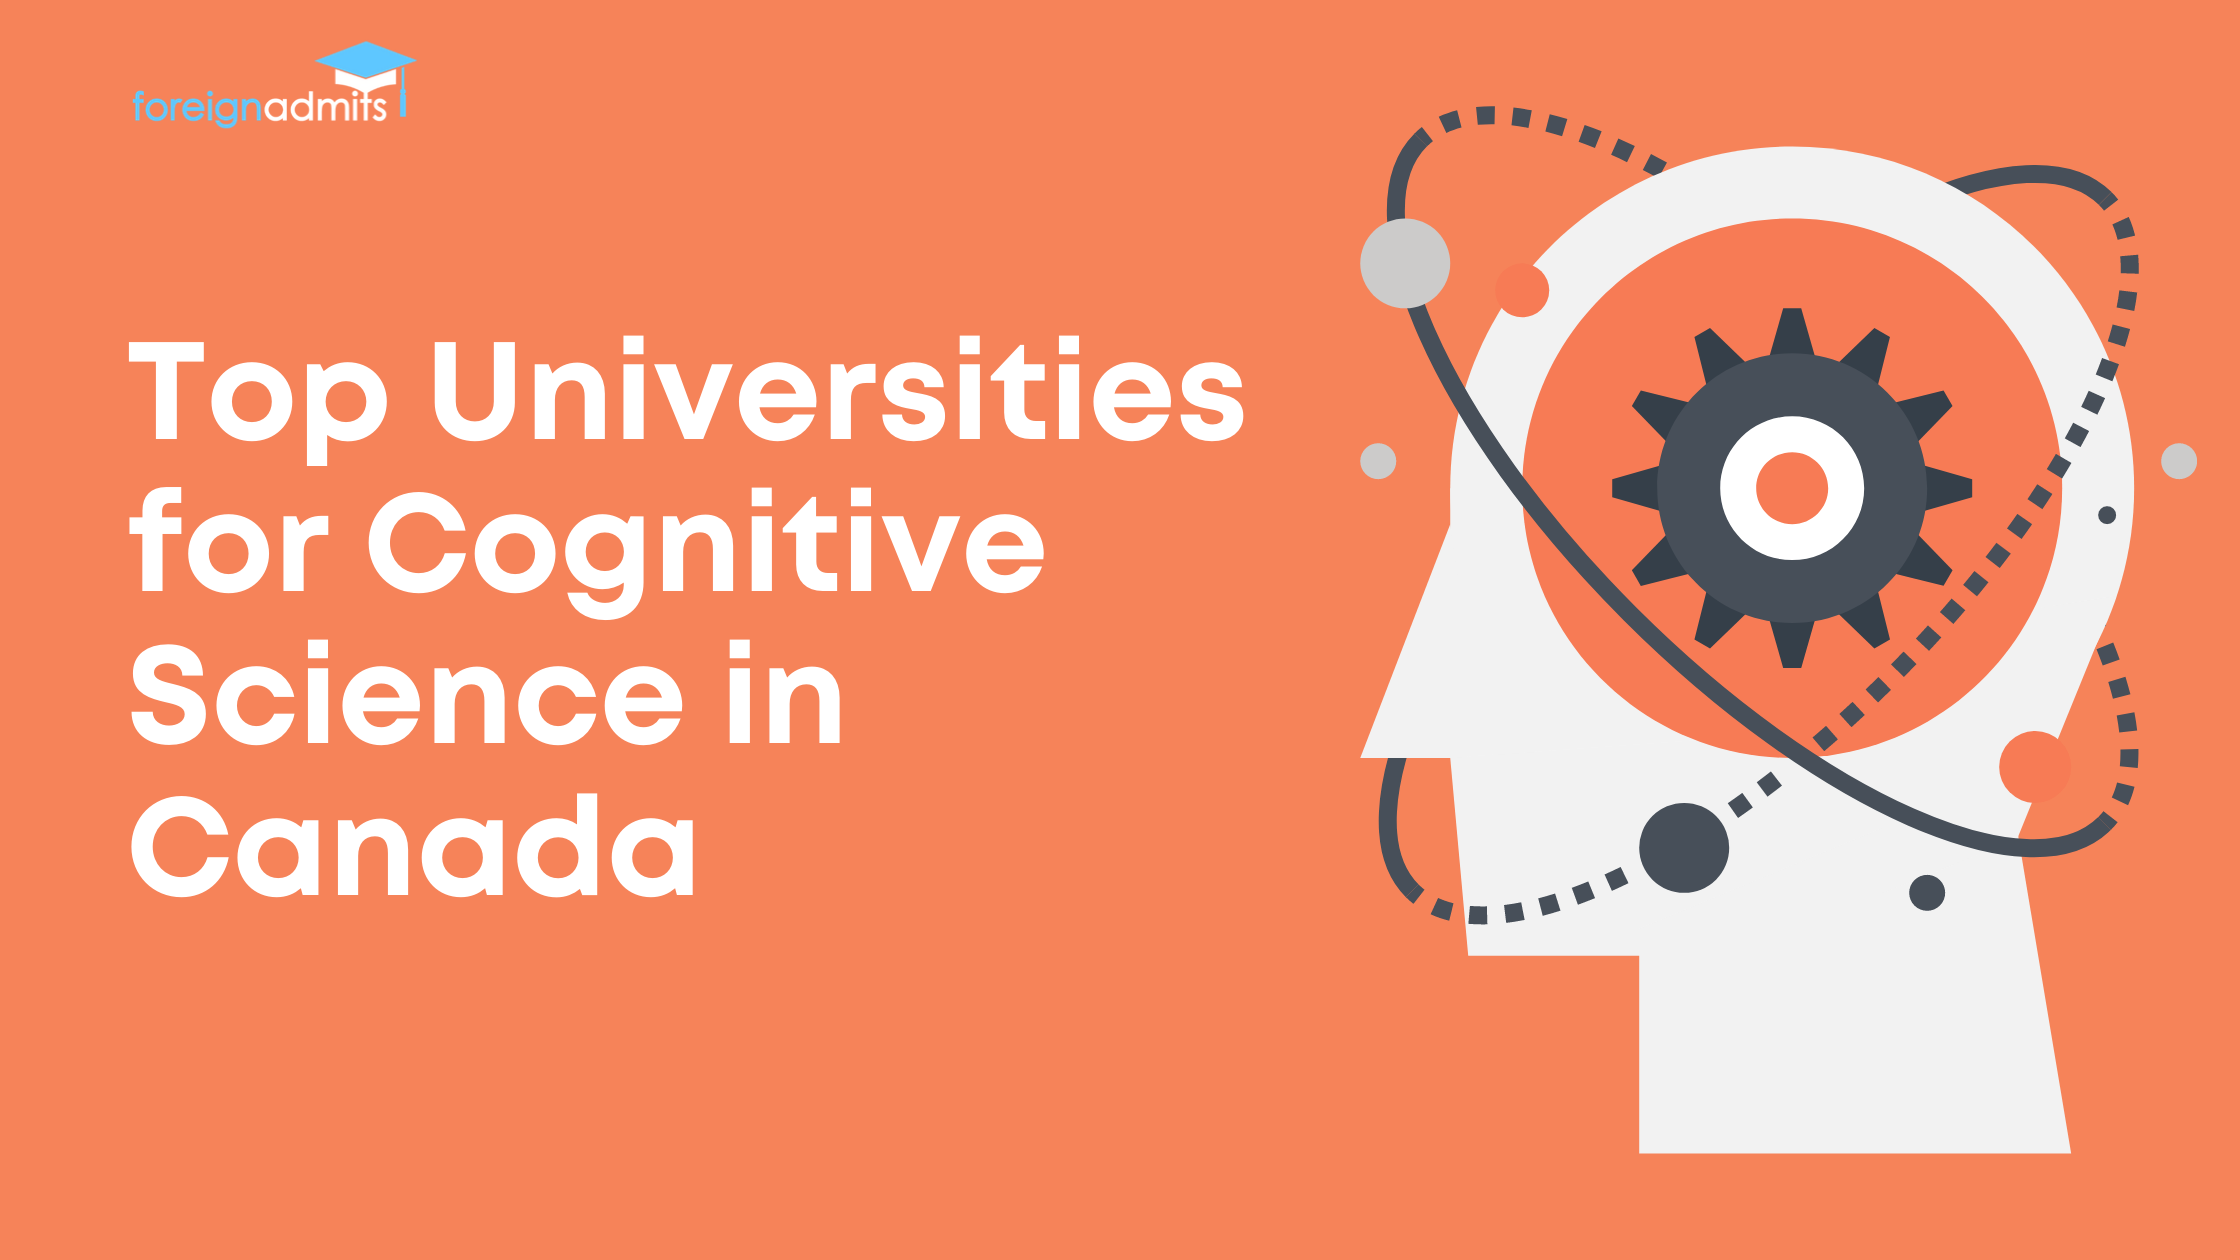 Top universities for Cognitive Science in Canada